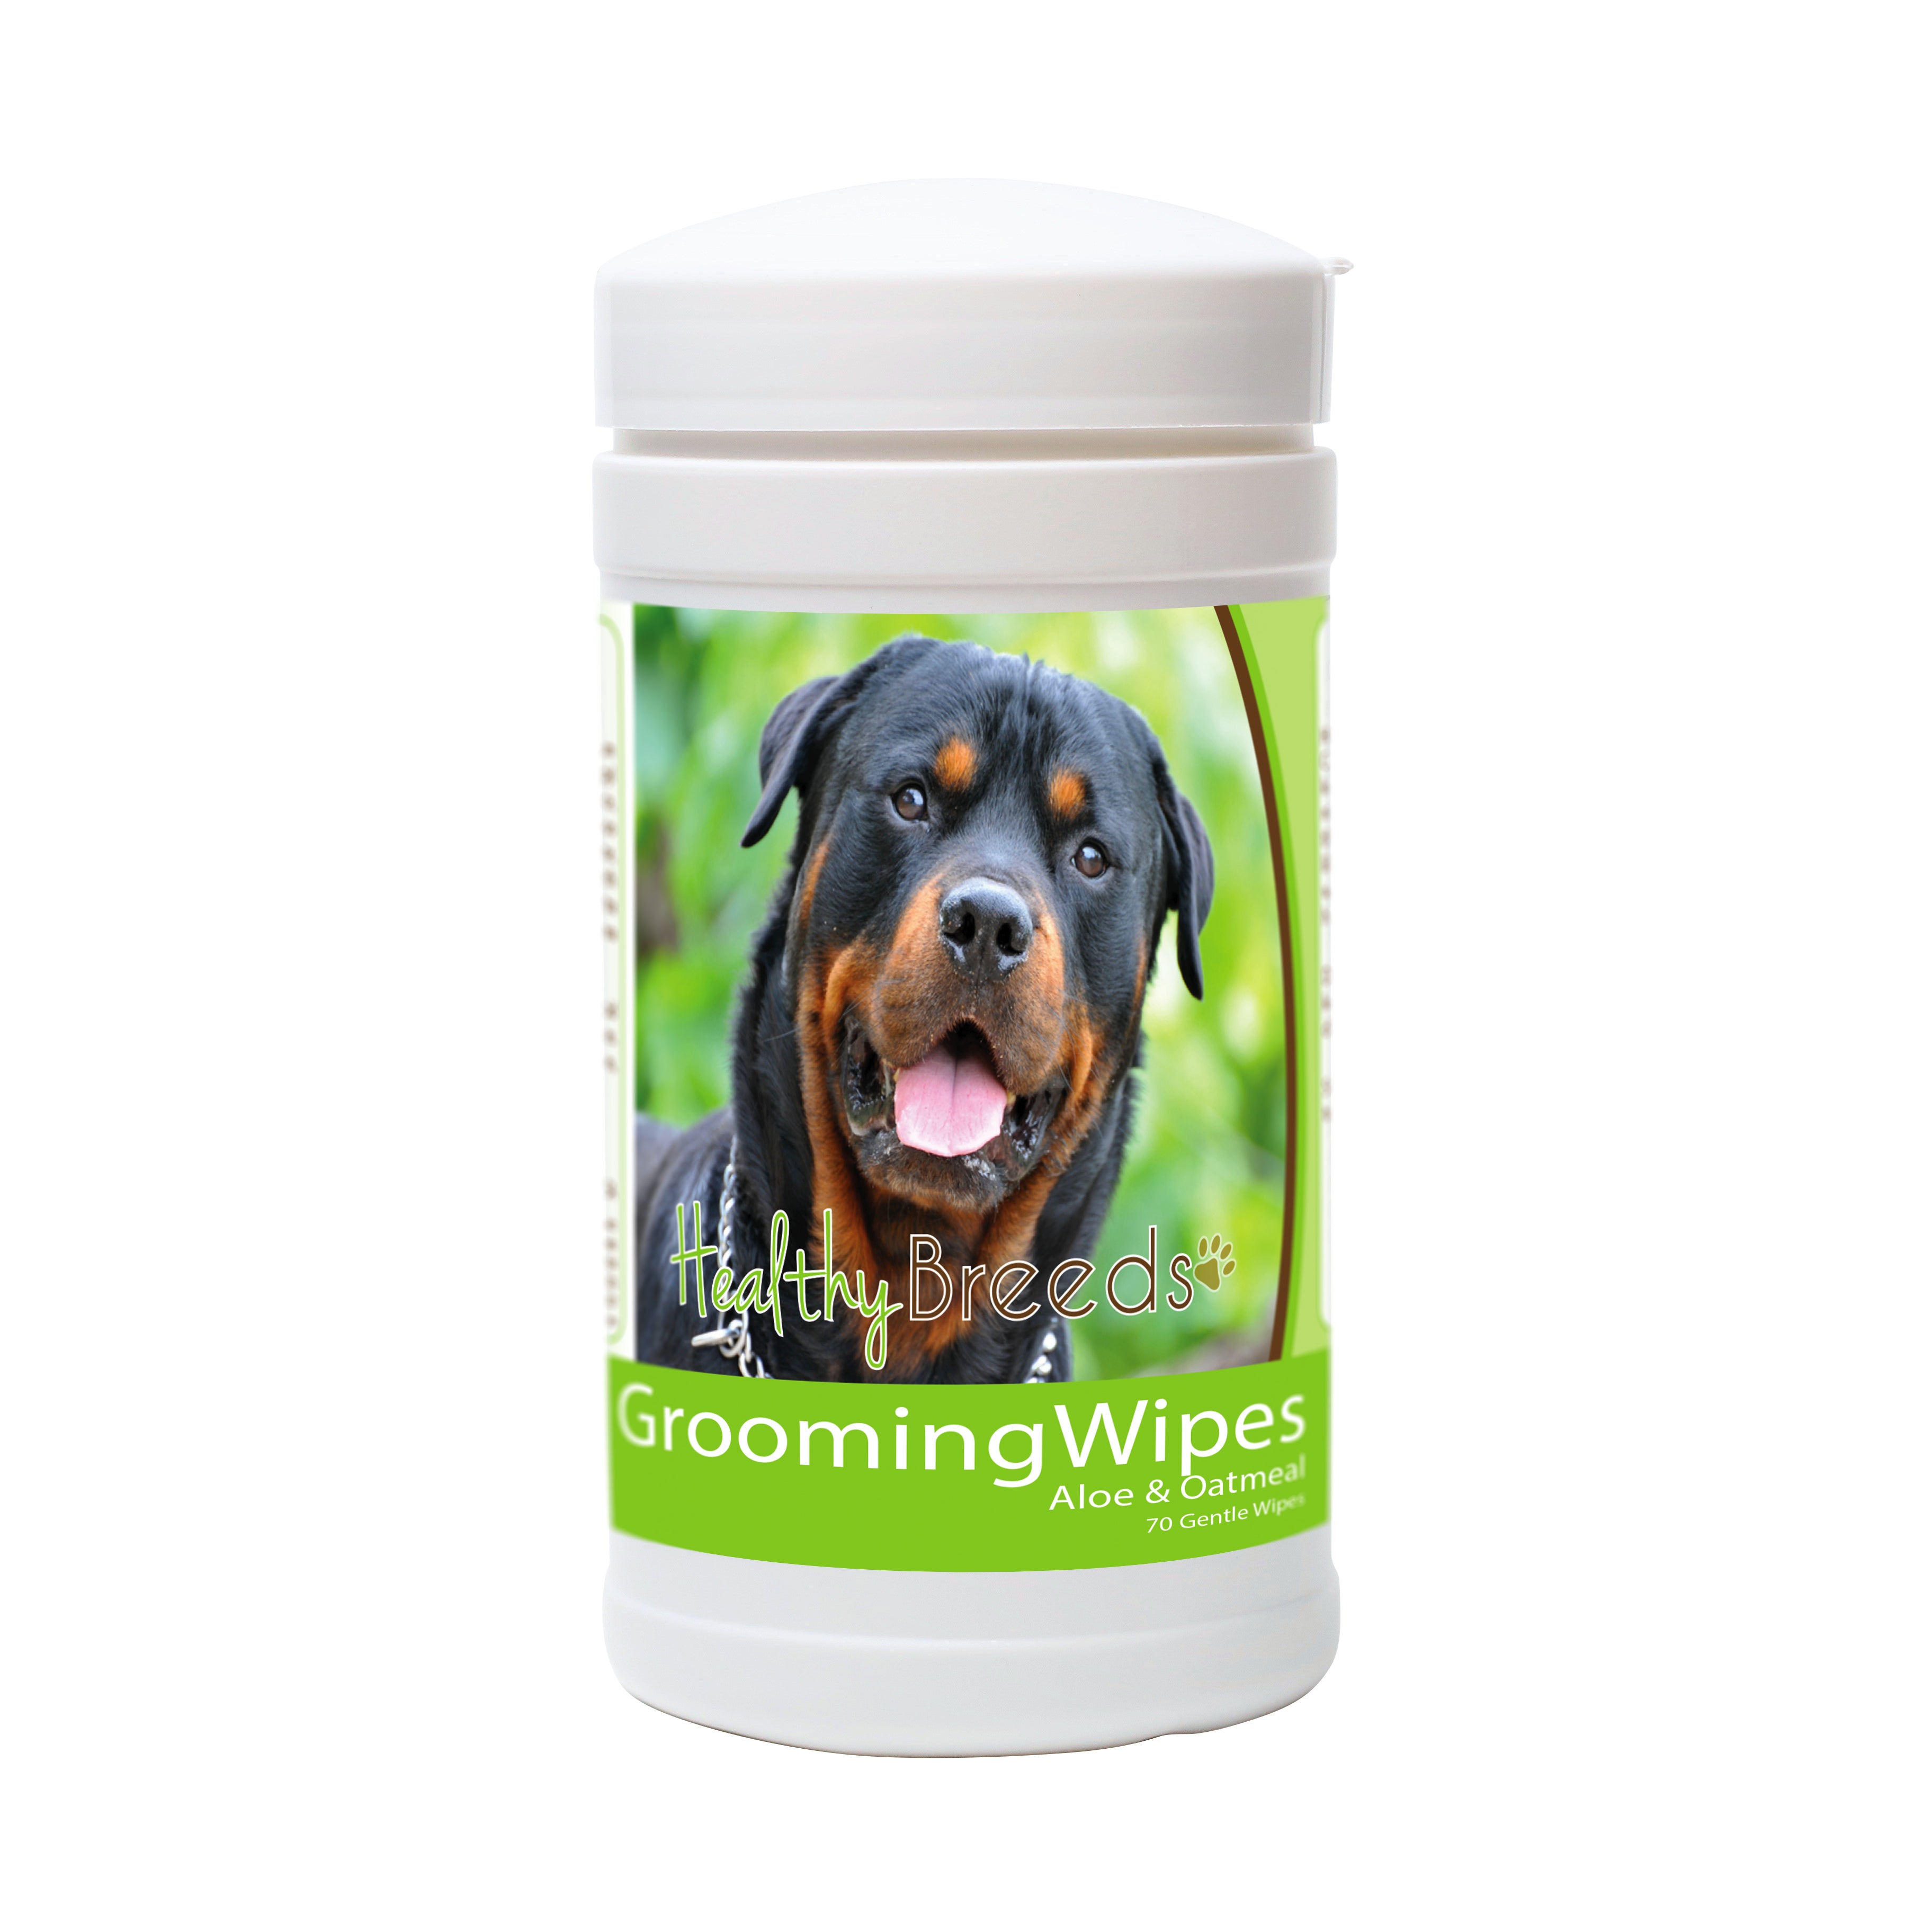 Rottweiler Grooming Wipes 70 Count